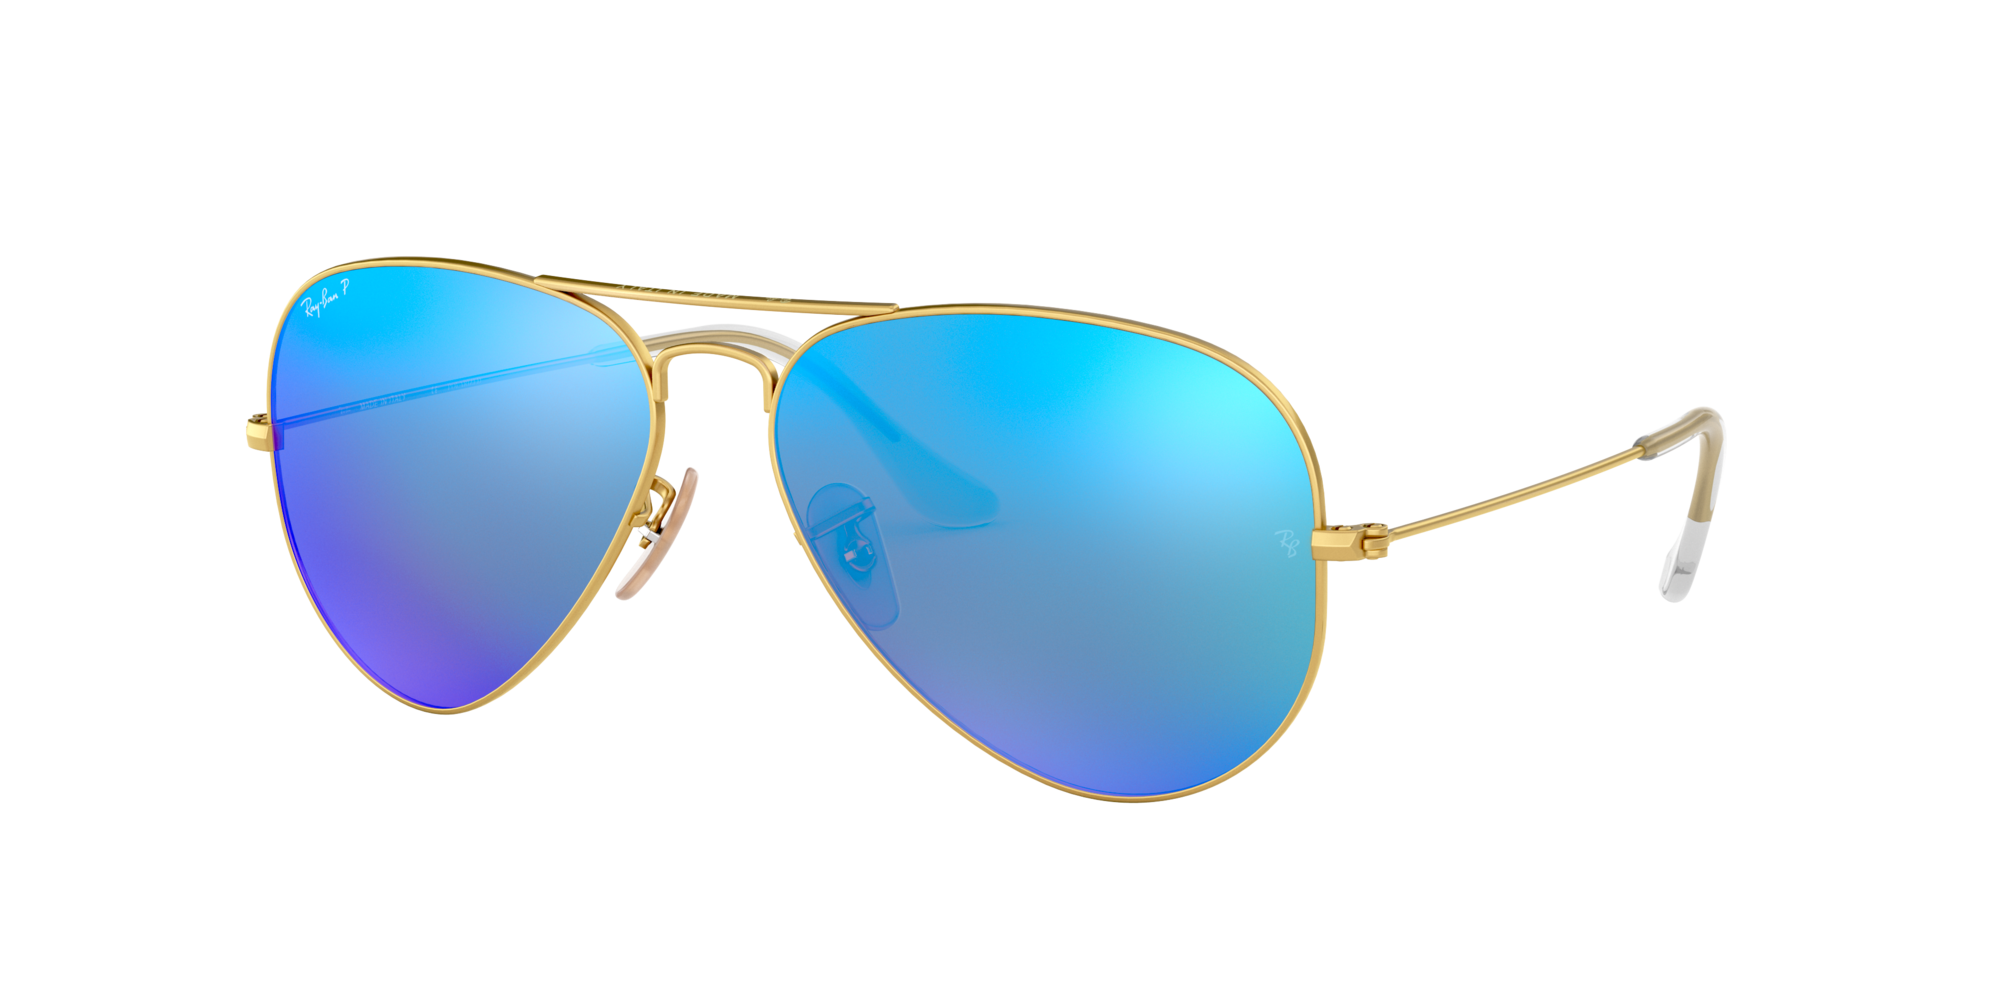 blue and white ray bans